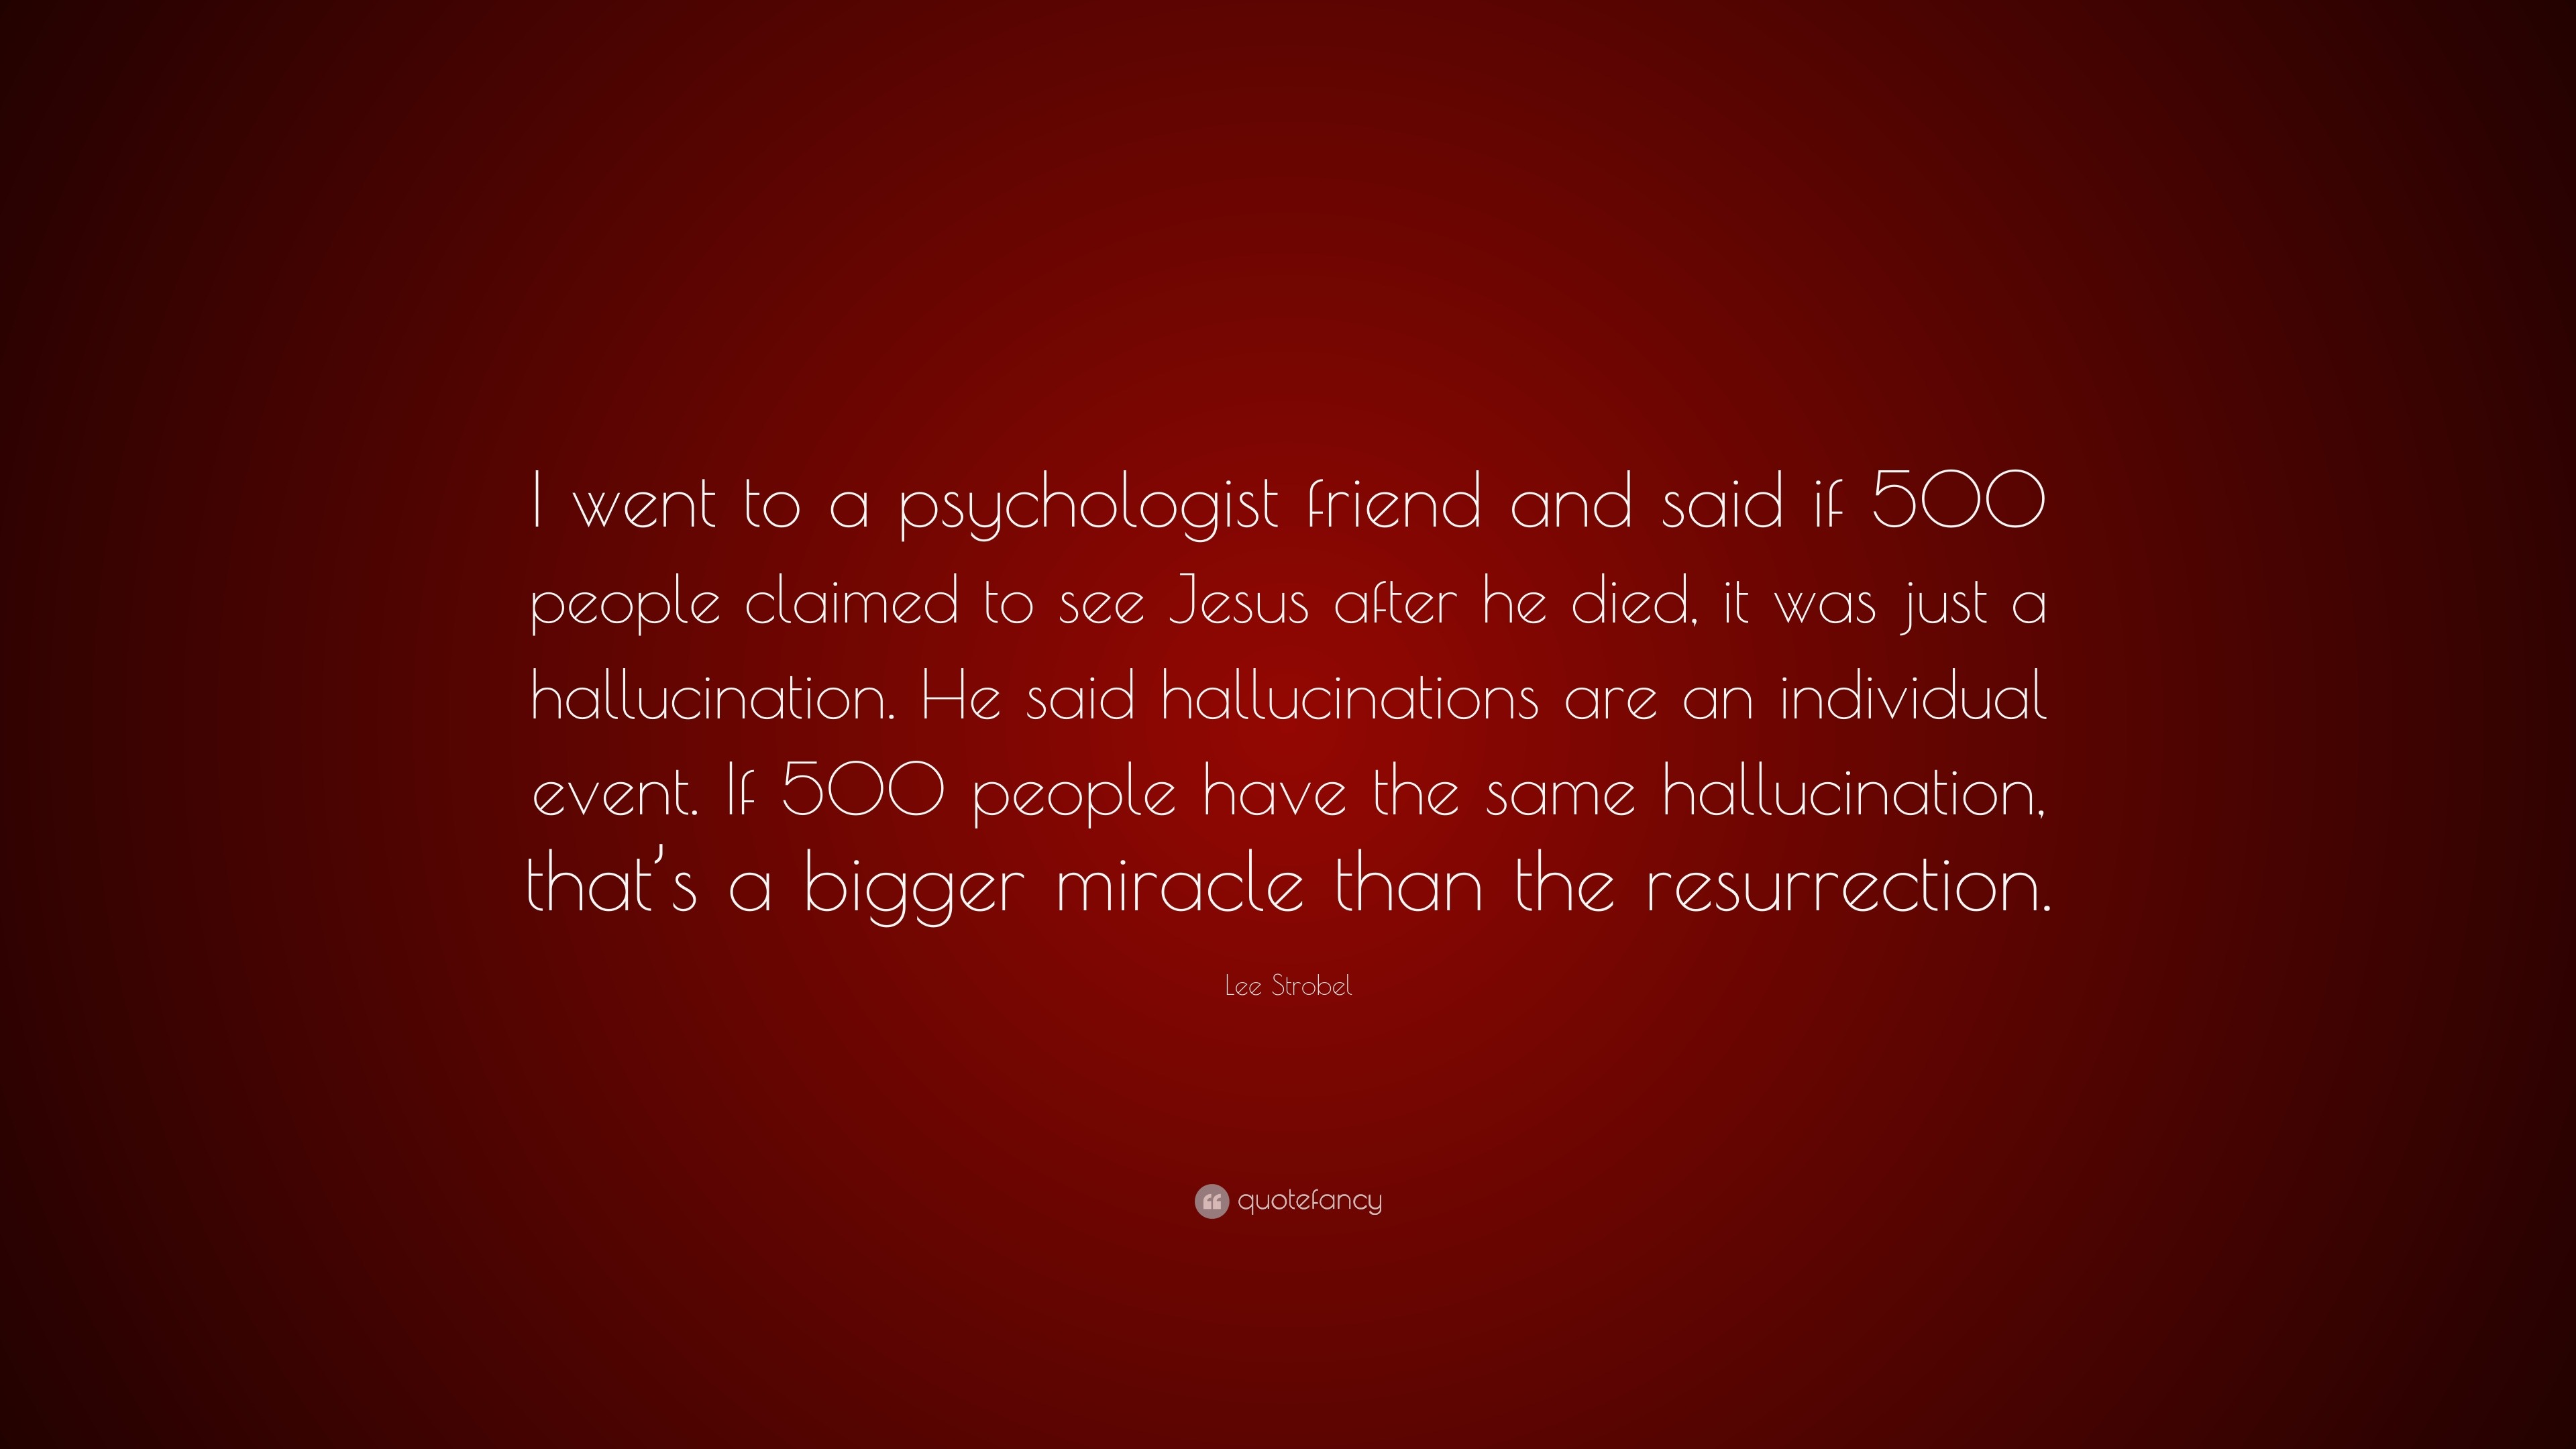 Lee Strobel Quote: “I went to a psychologist friend and ...